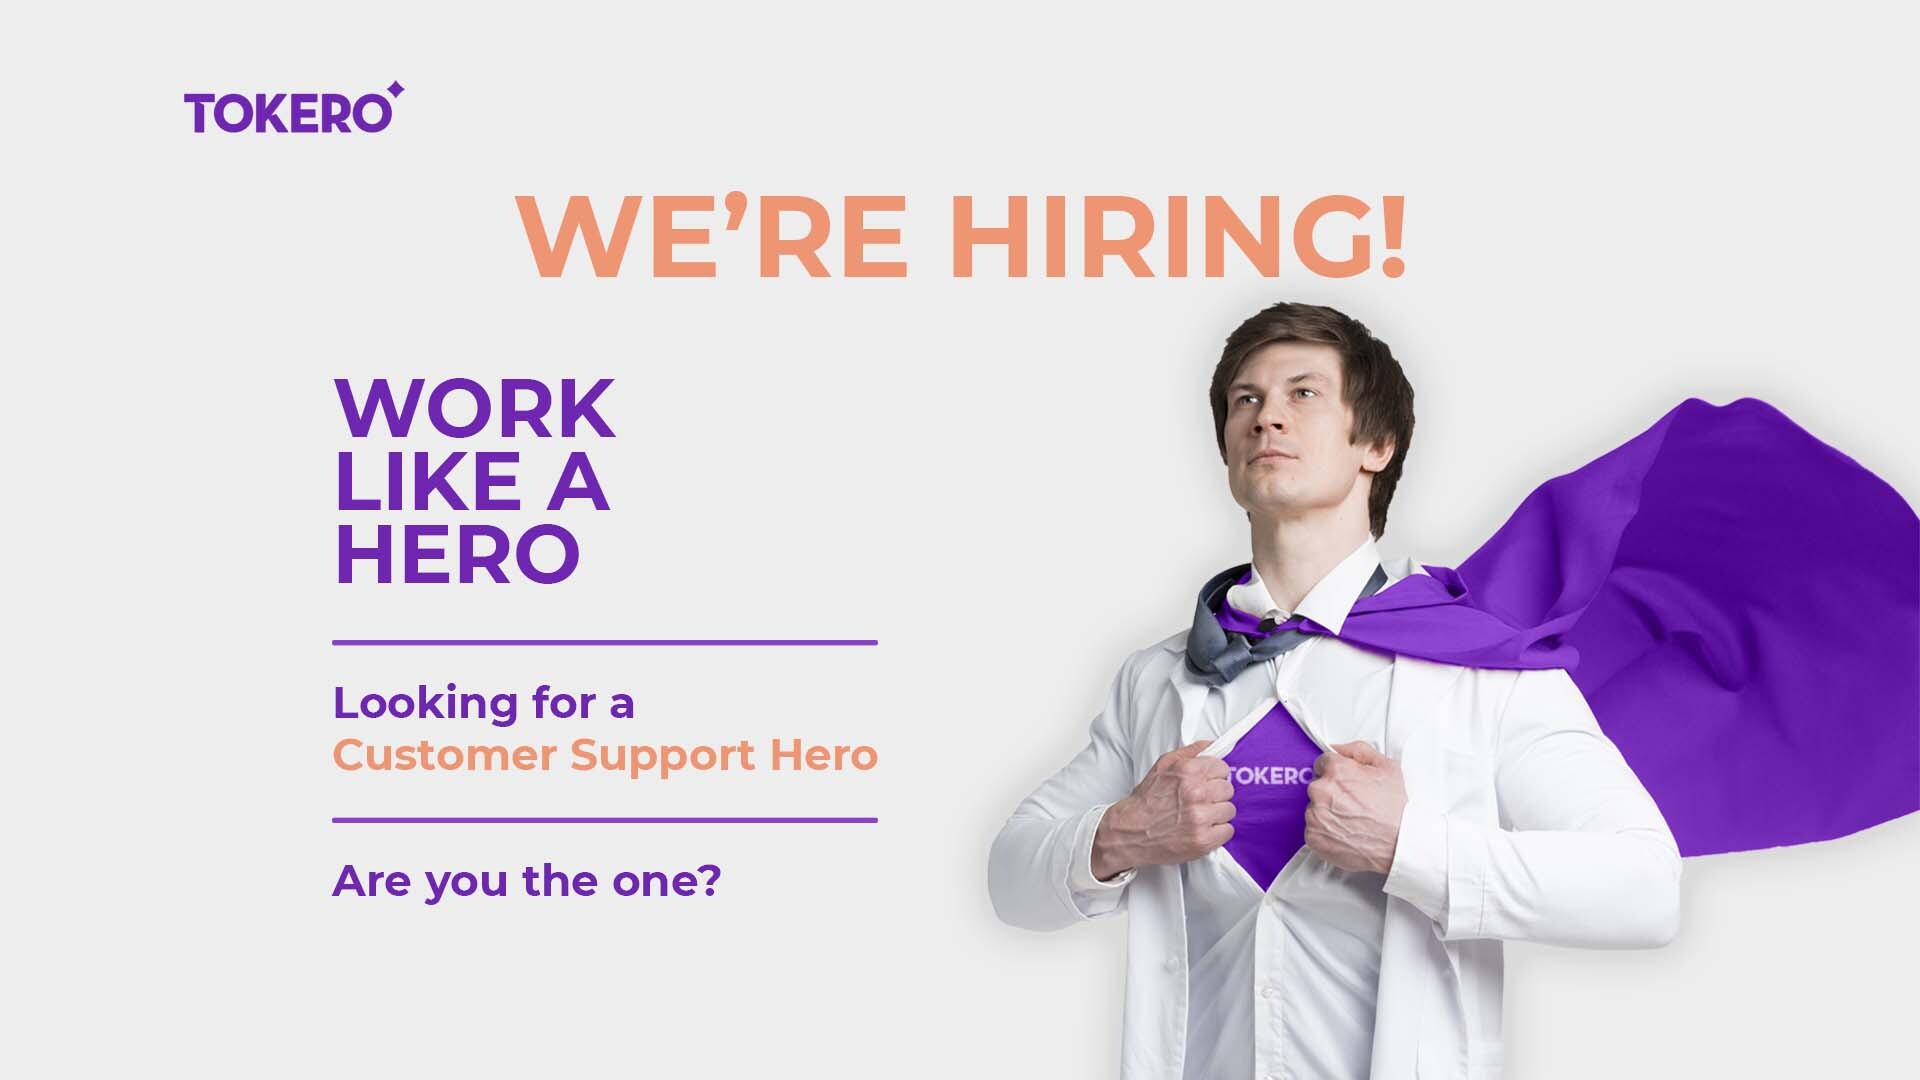 We are hiring a Customer Support Hero